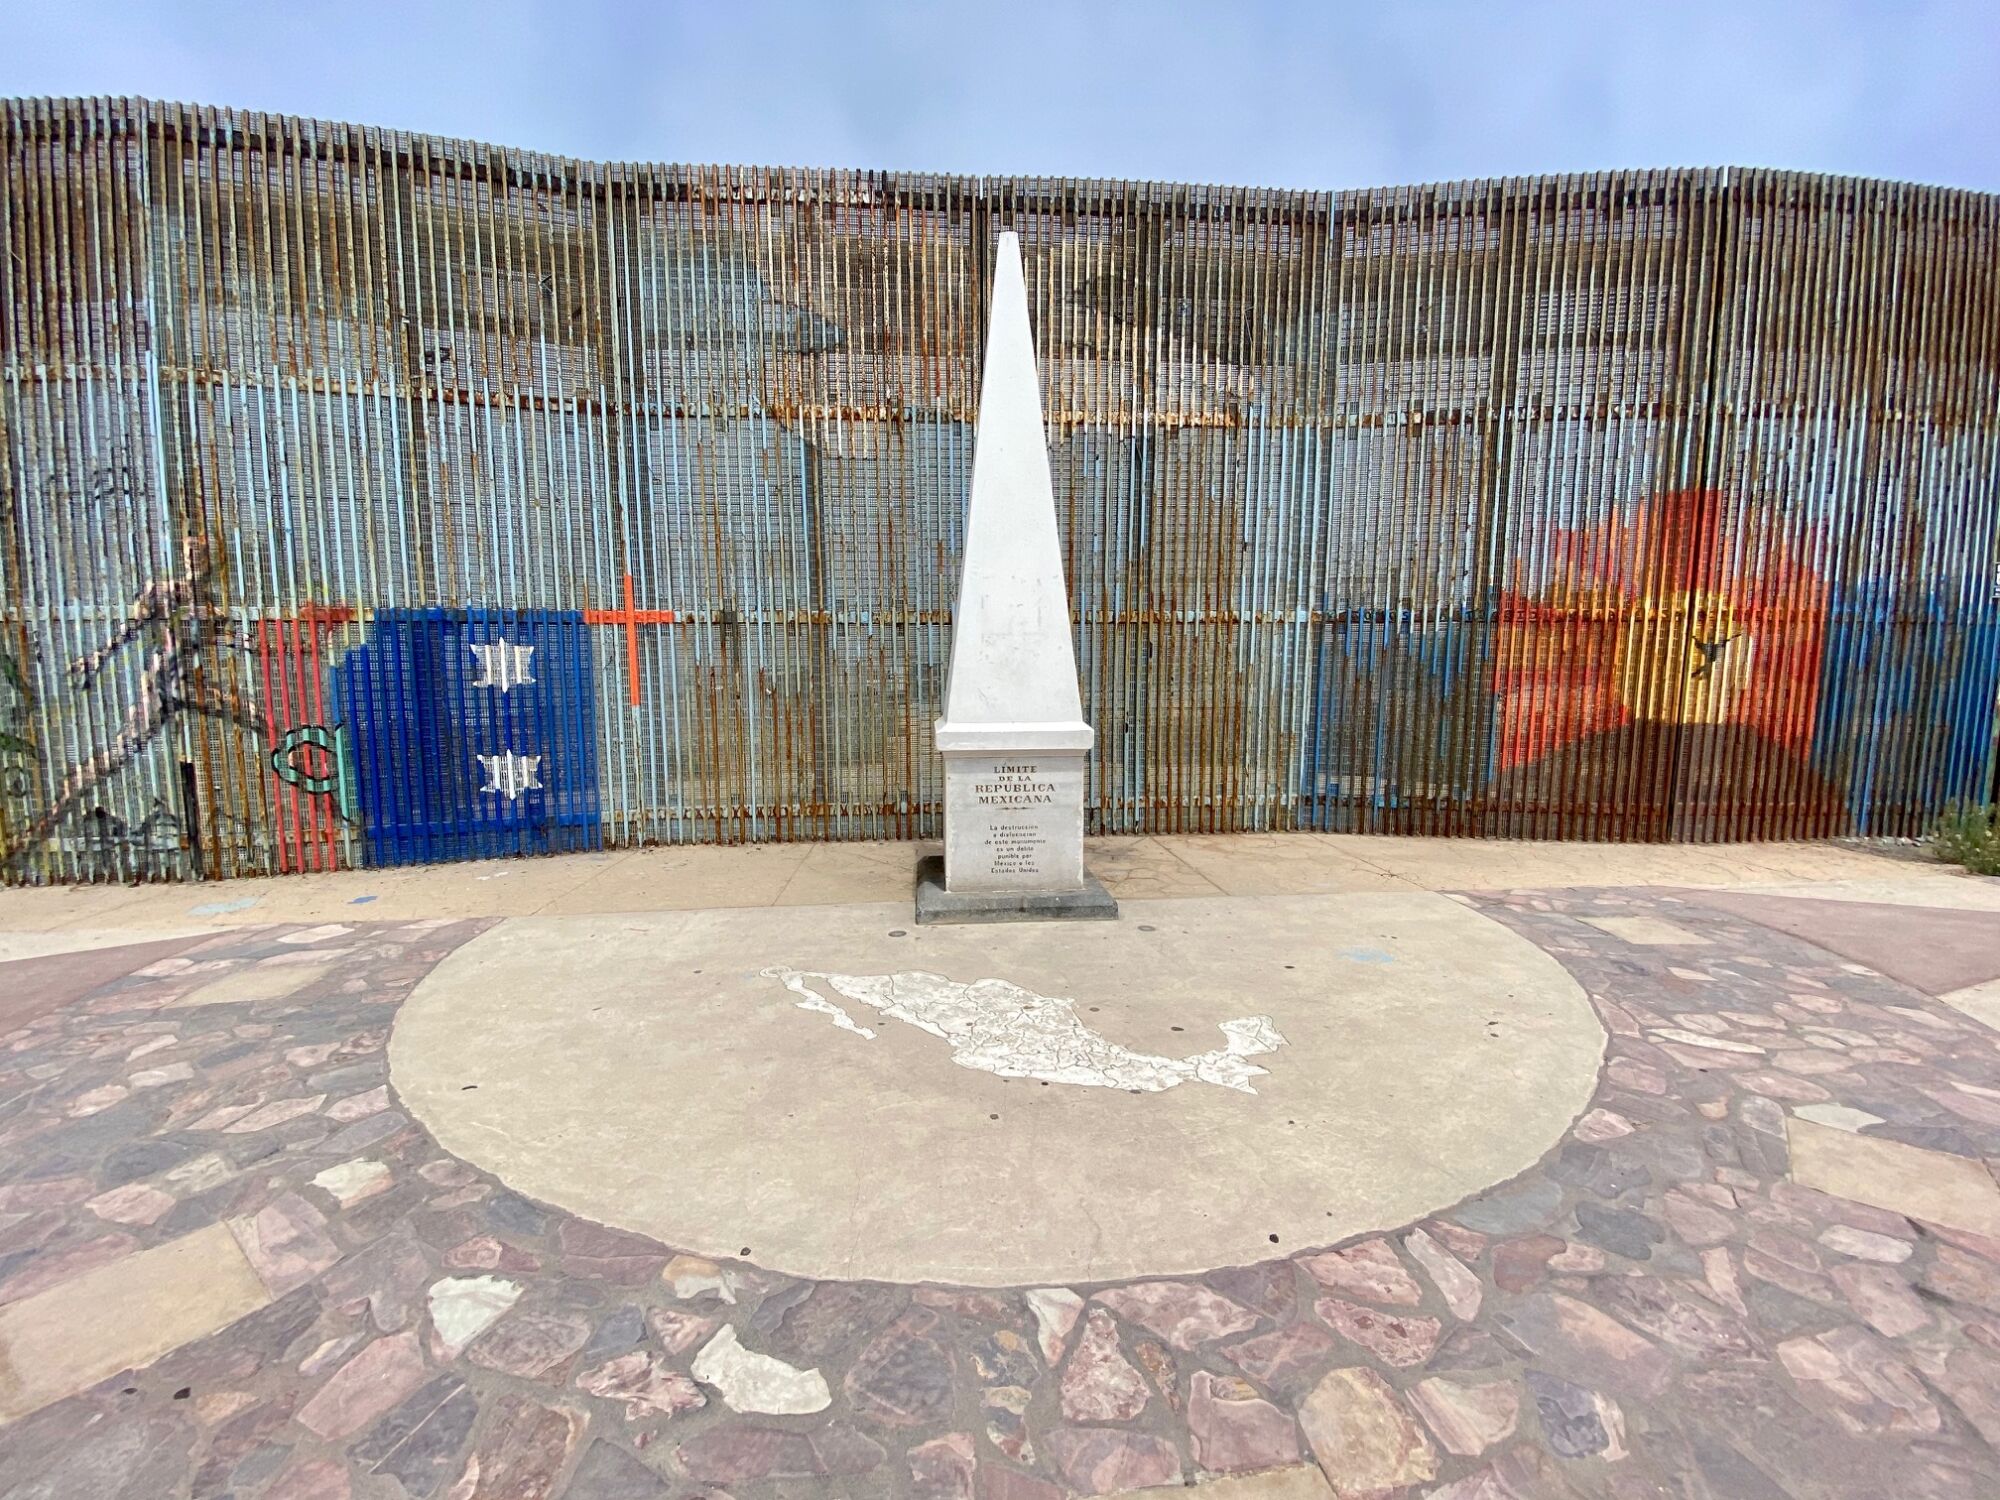 Monument 258 at Friendship Park from Playas de Tijuana in August 2020.